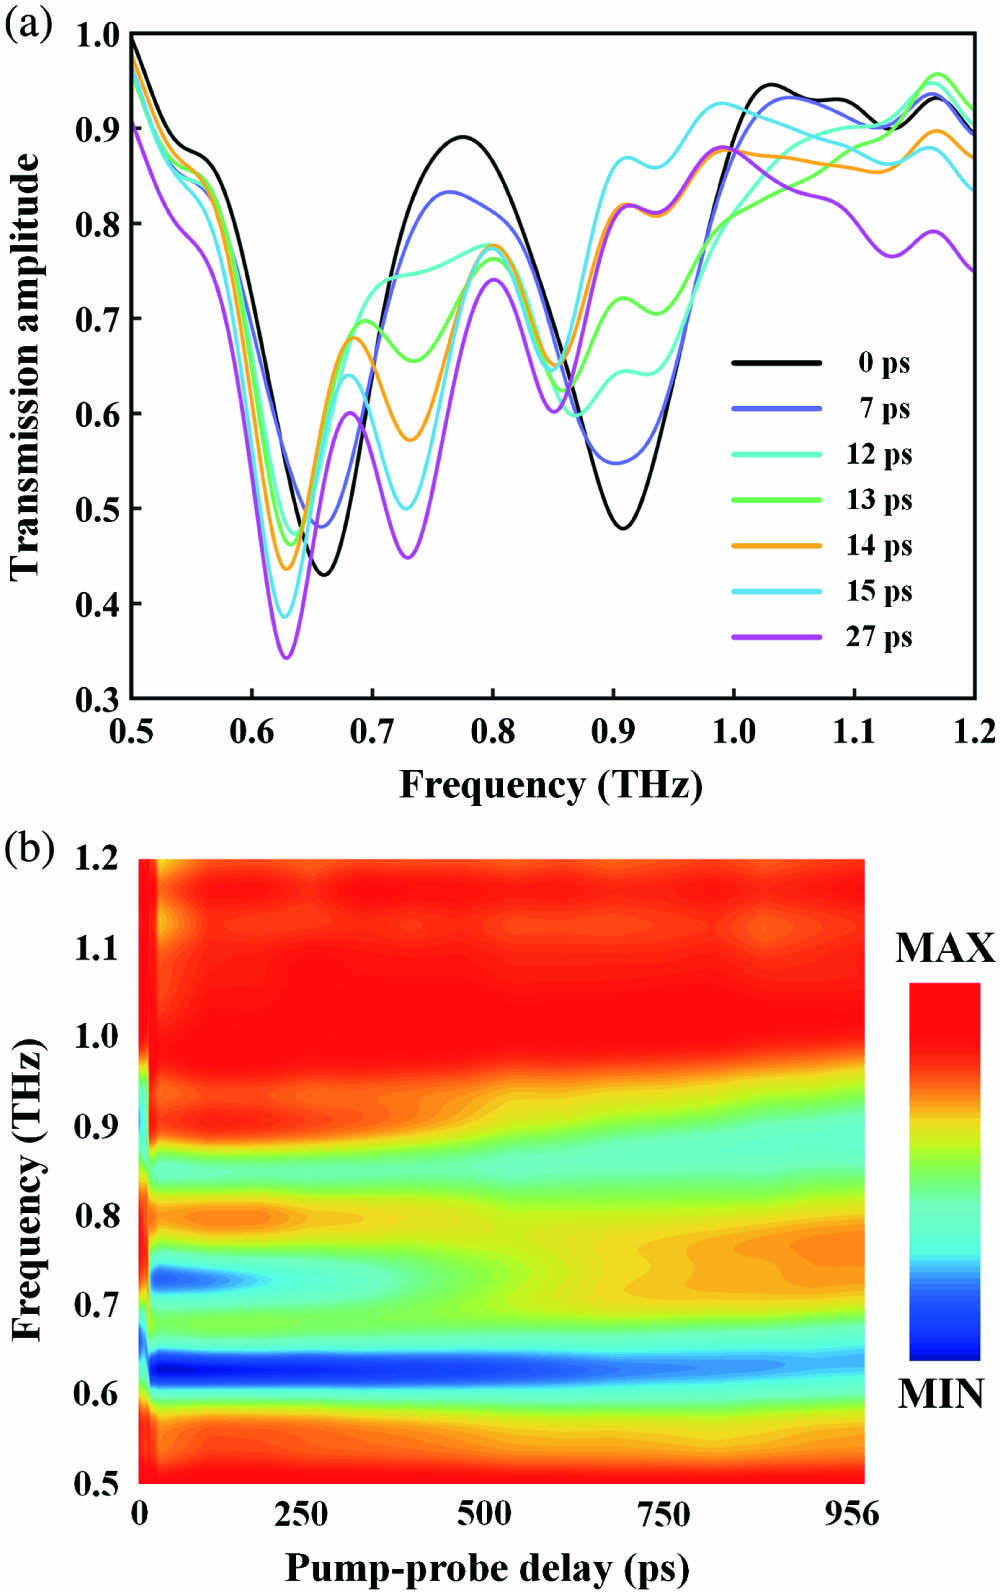 (a) Experimentally measured THz transmission spectra of the metadevice at various pump-probe delays (as labeled). (b) Color map of THz transient transmissions against pump-probe delay and frequency.